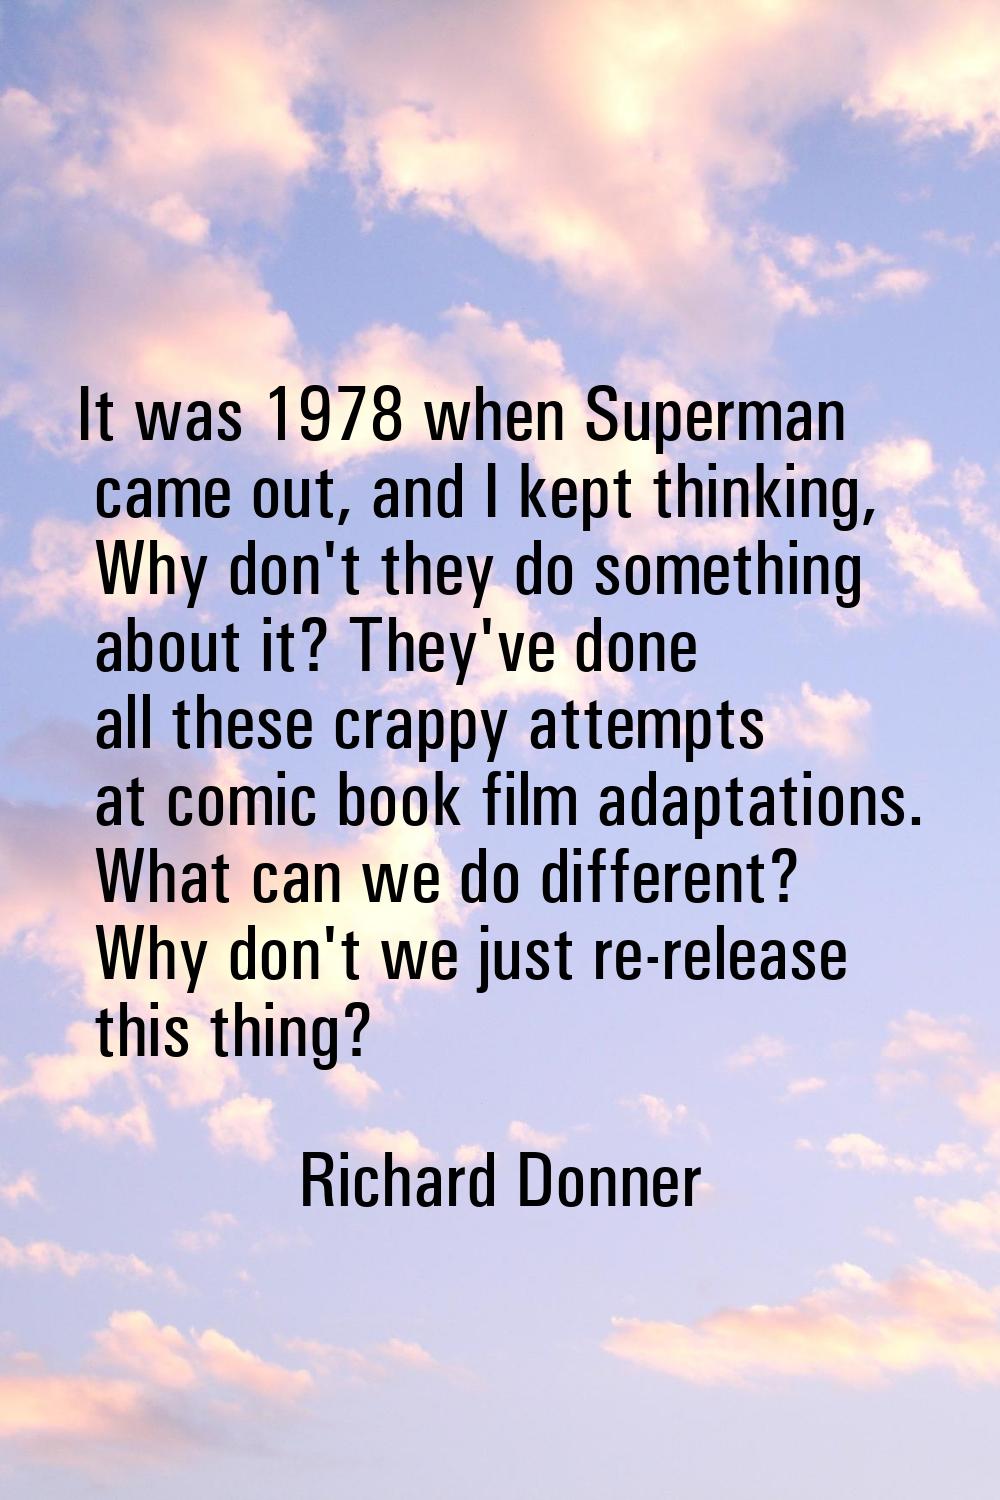 It was 1978 when Superman came out, and I kept thinking, Why don't they do something about it? They